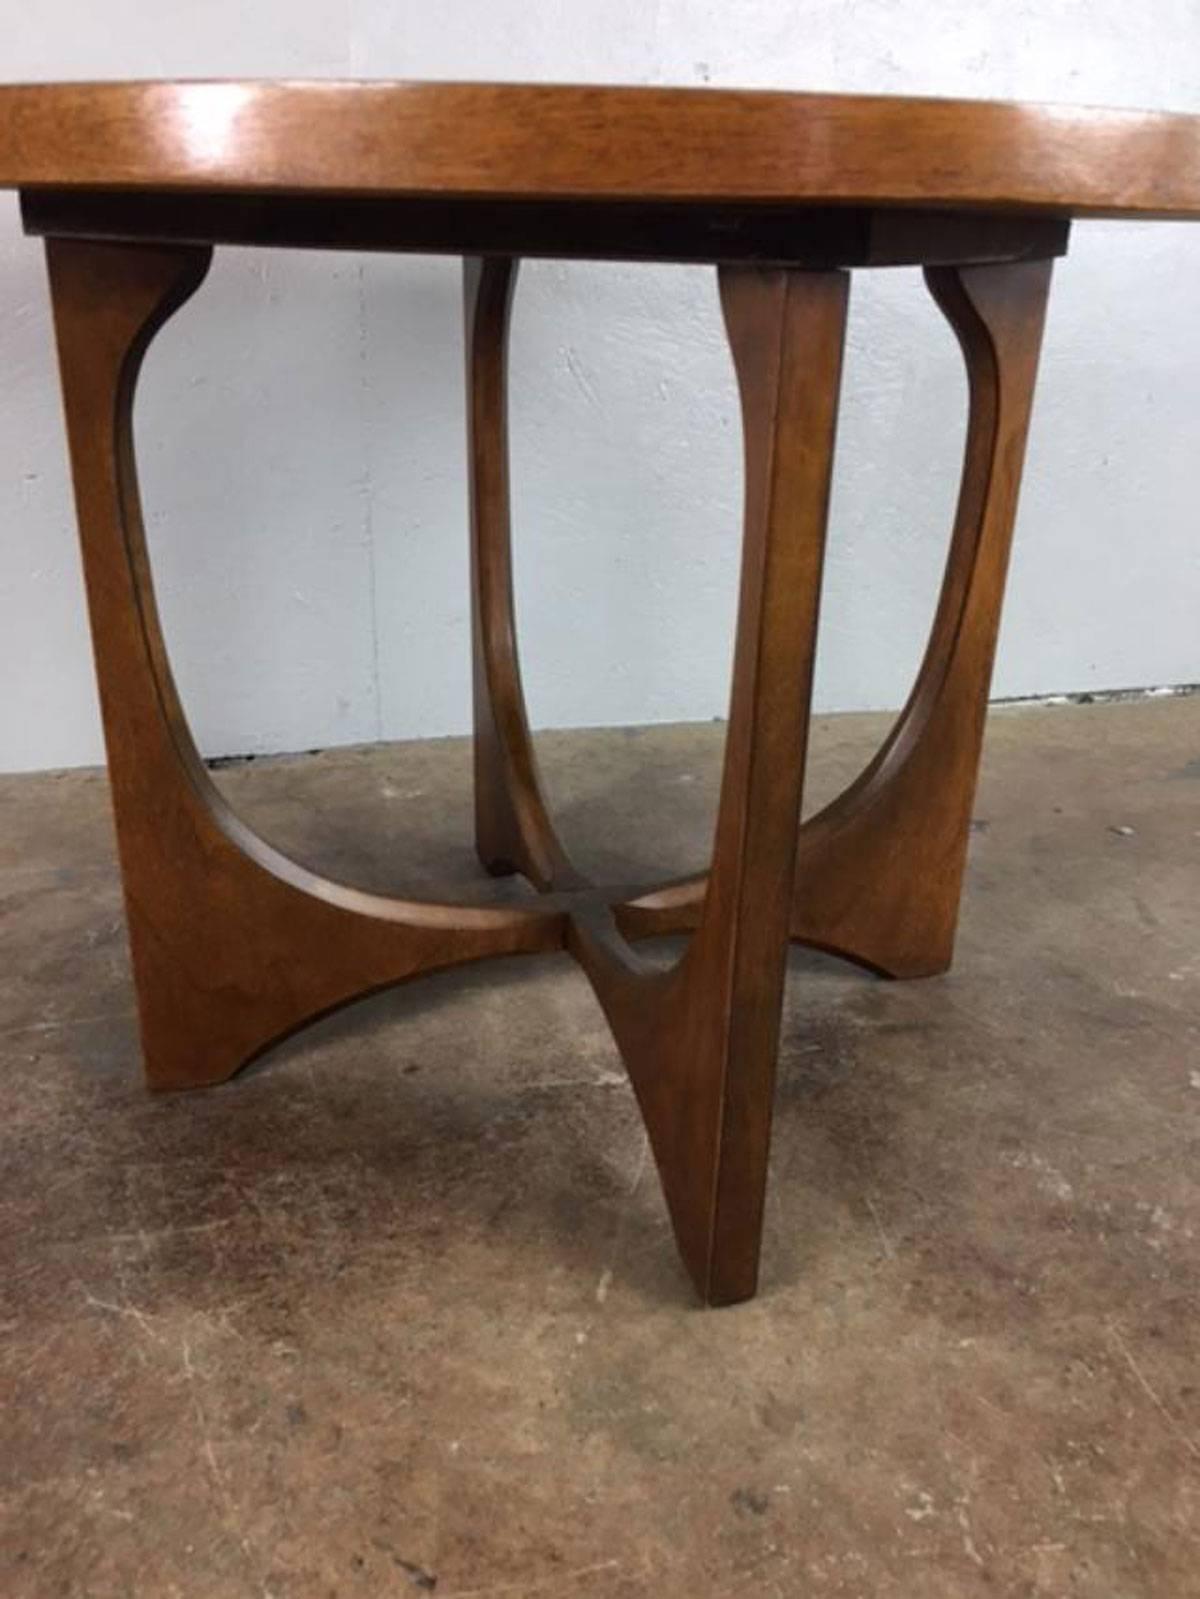 Brasilia side or end table in walnut by Broyhill. Original acquisition condition. Overall very good condition.